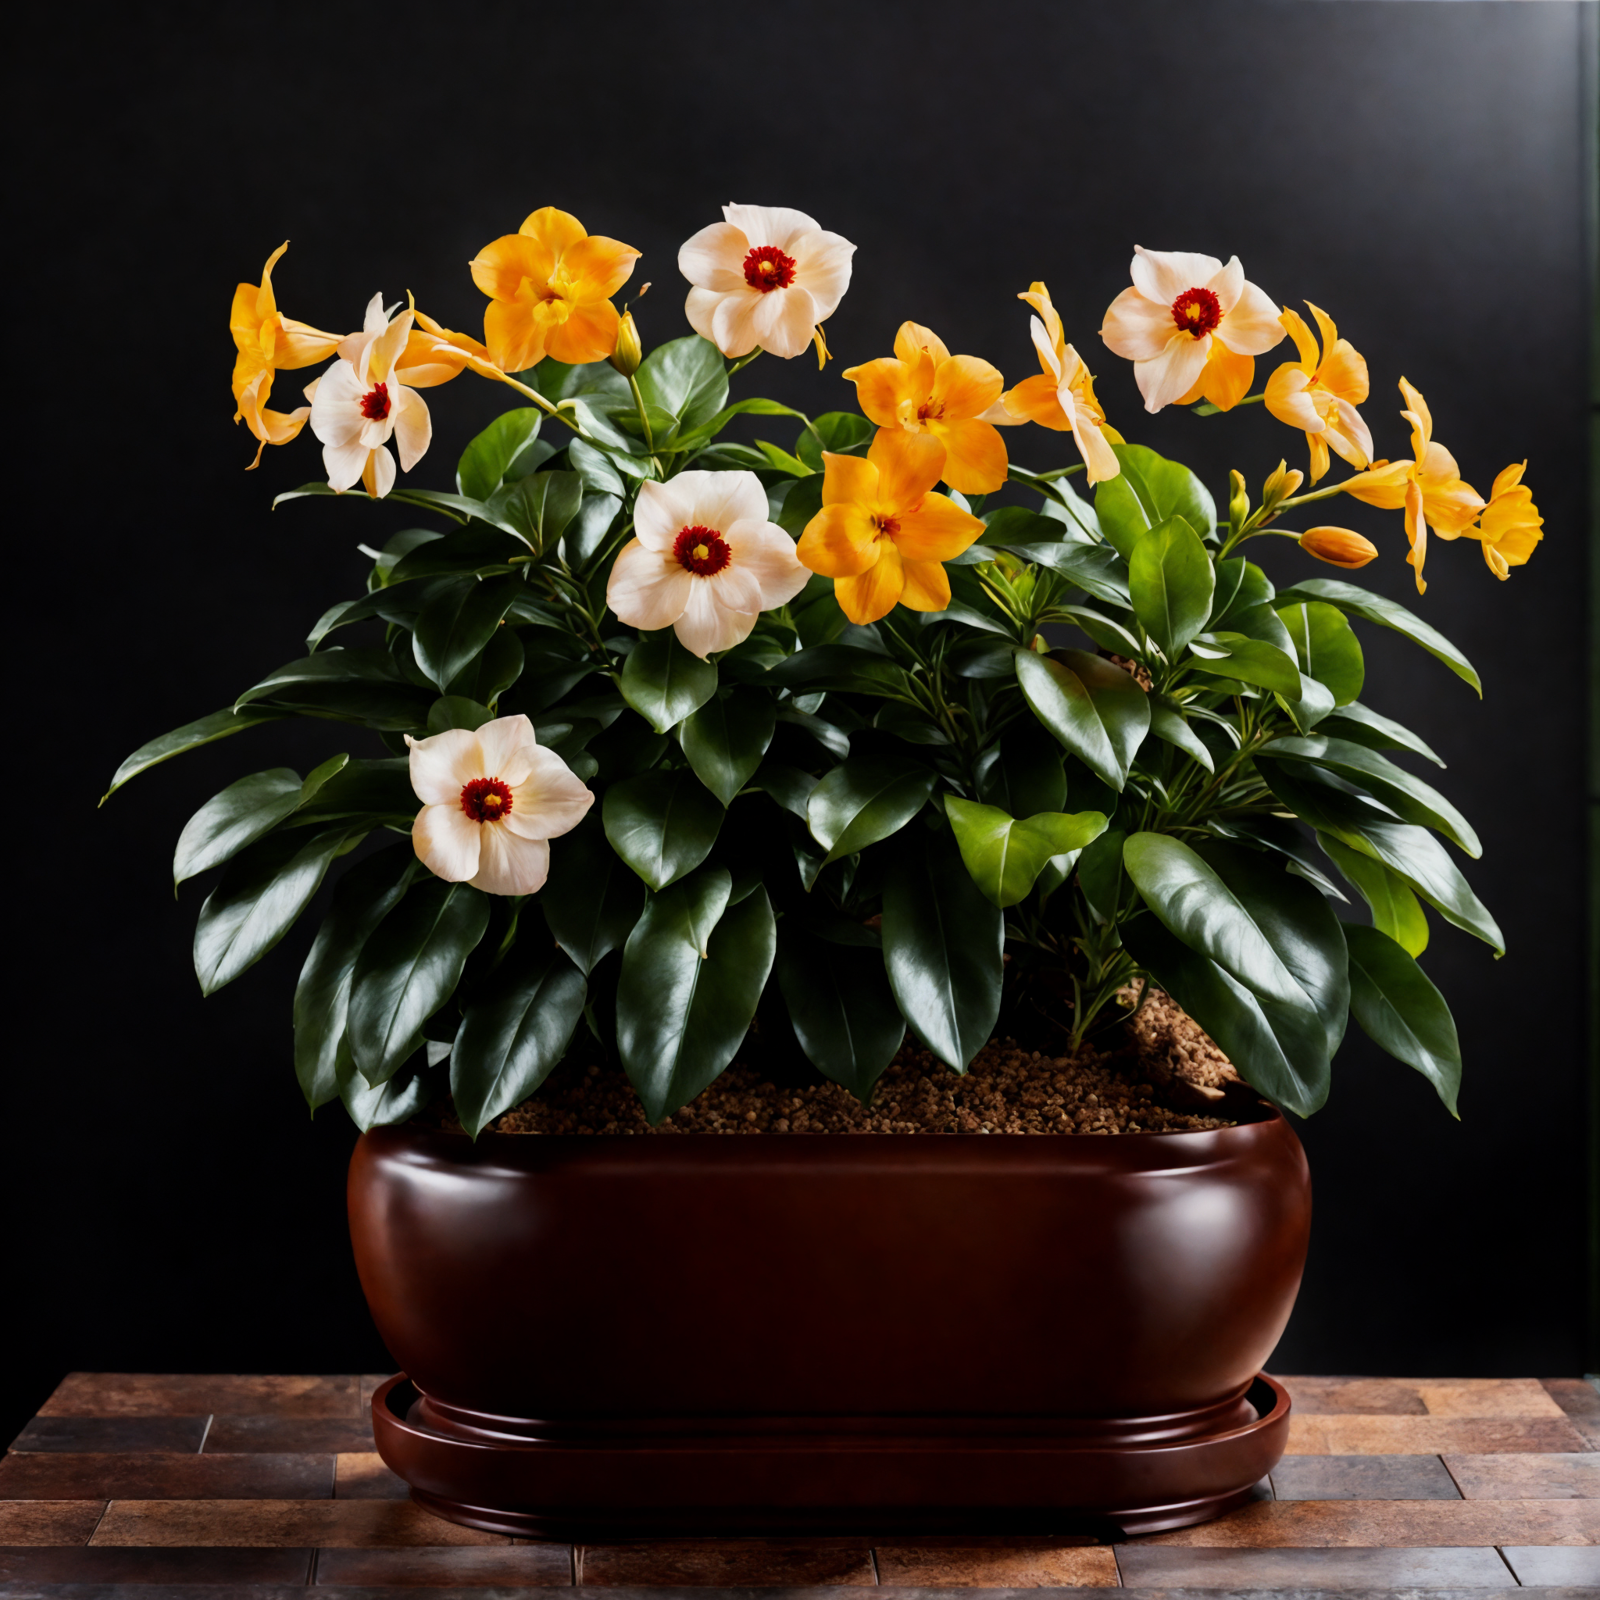 Allamanda cathartica with yellow blooms in a brown vase on a wooden table, clear lighting, dark background.